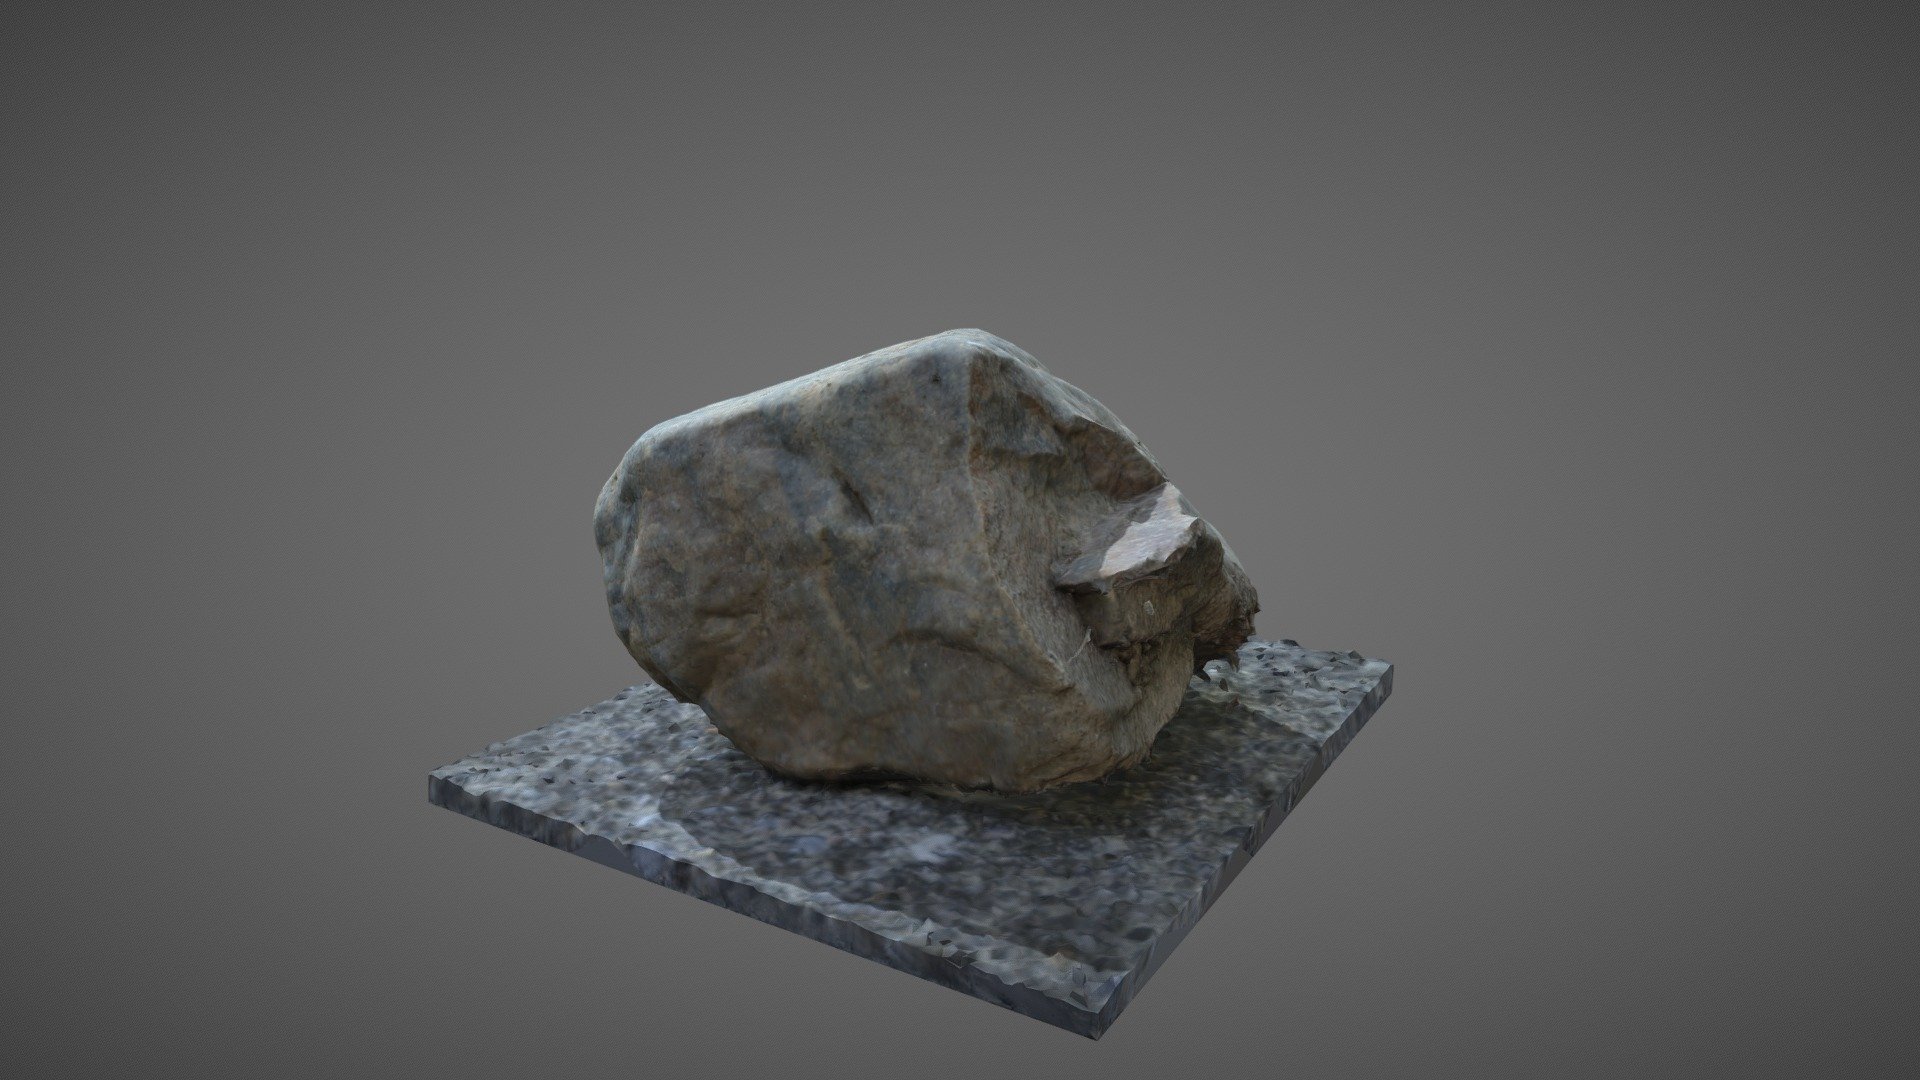 Just a stone | My First Photogrammetry Scan